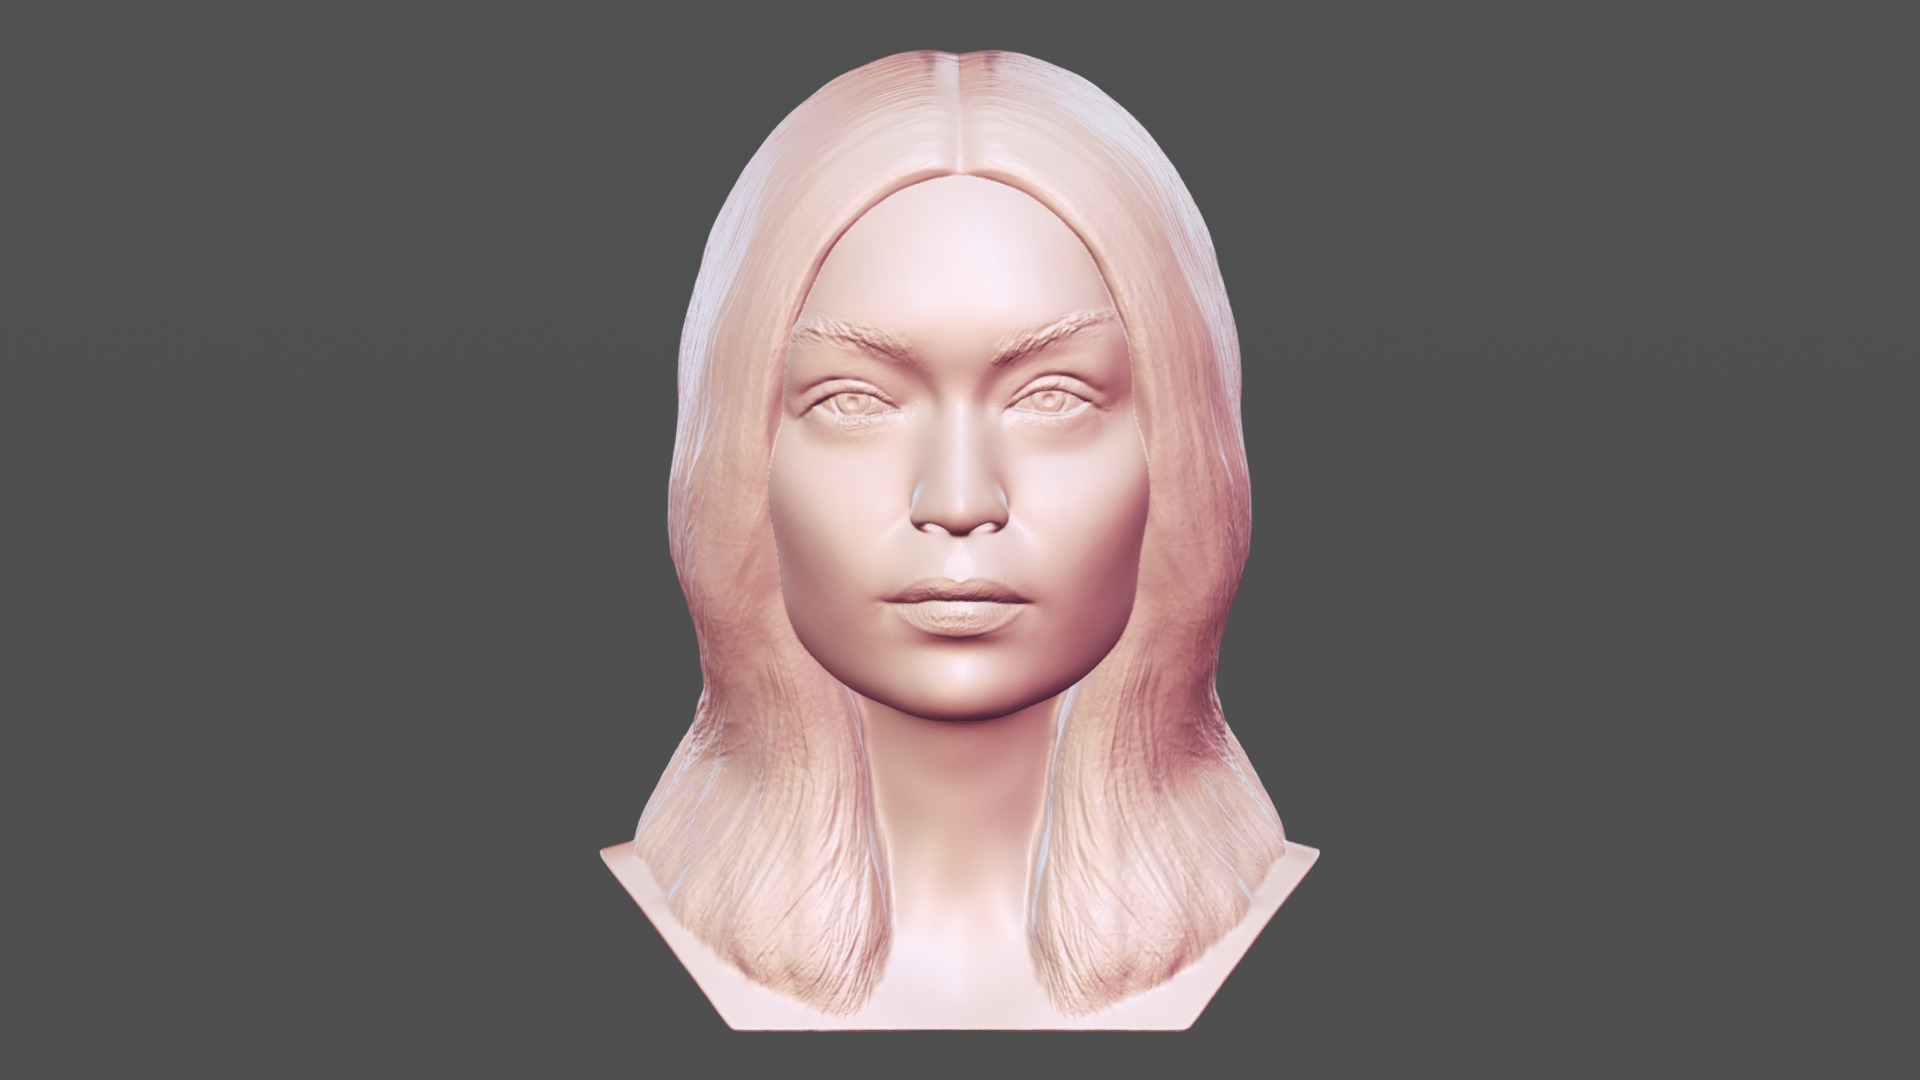 3D model Gigi Hadid bust for 3D printing - This is a 3D model of the Gigi Hadid bust for 3D printing. The 3D model is about a person with a white head covering.